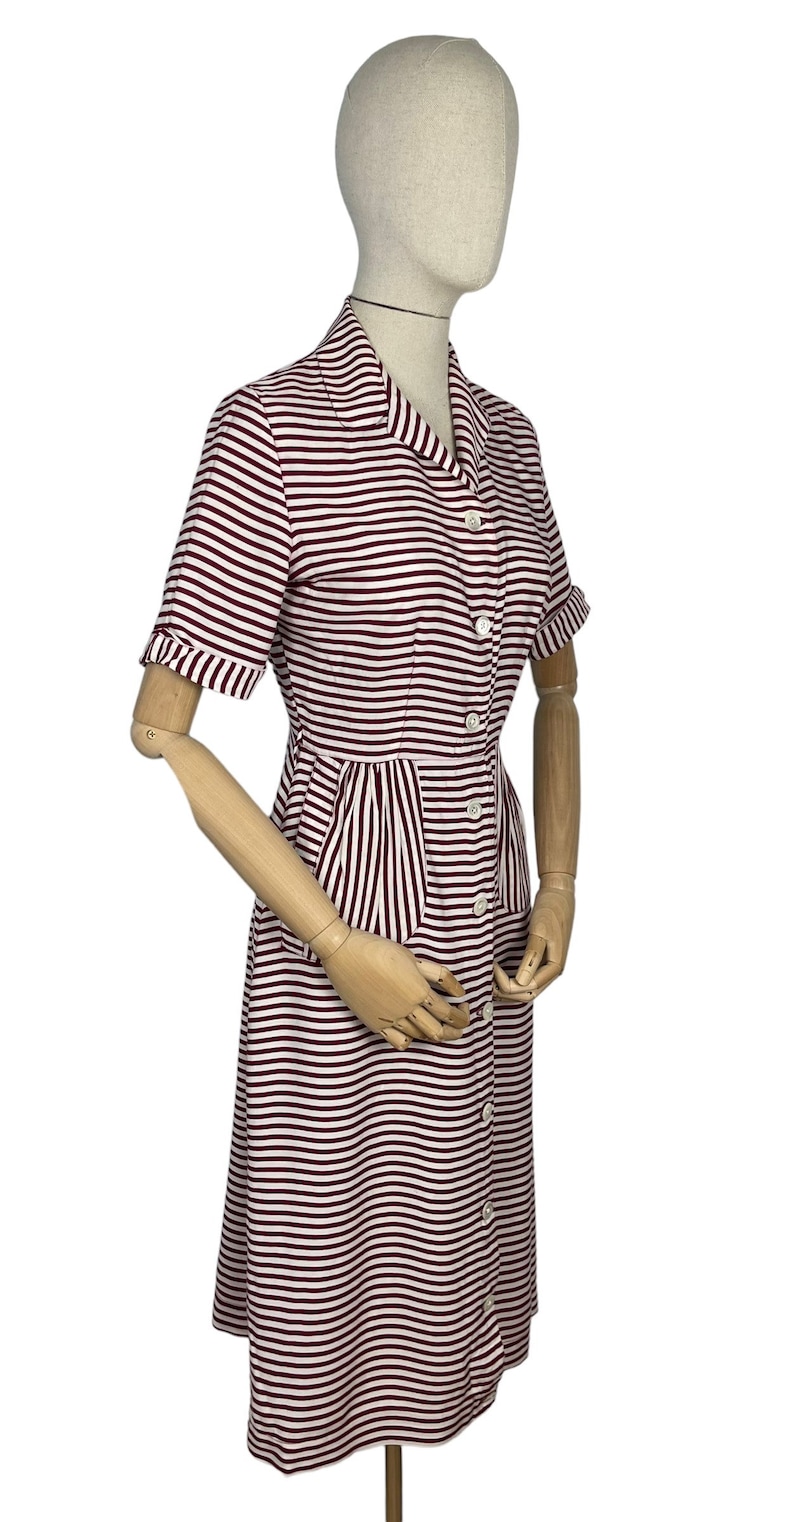 Original 1940s CC41 Burgundy and White Floppy Cotton Day Dress with Pockets Bust 36 image 2